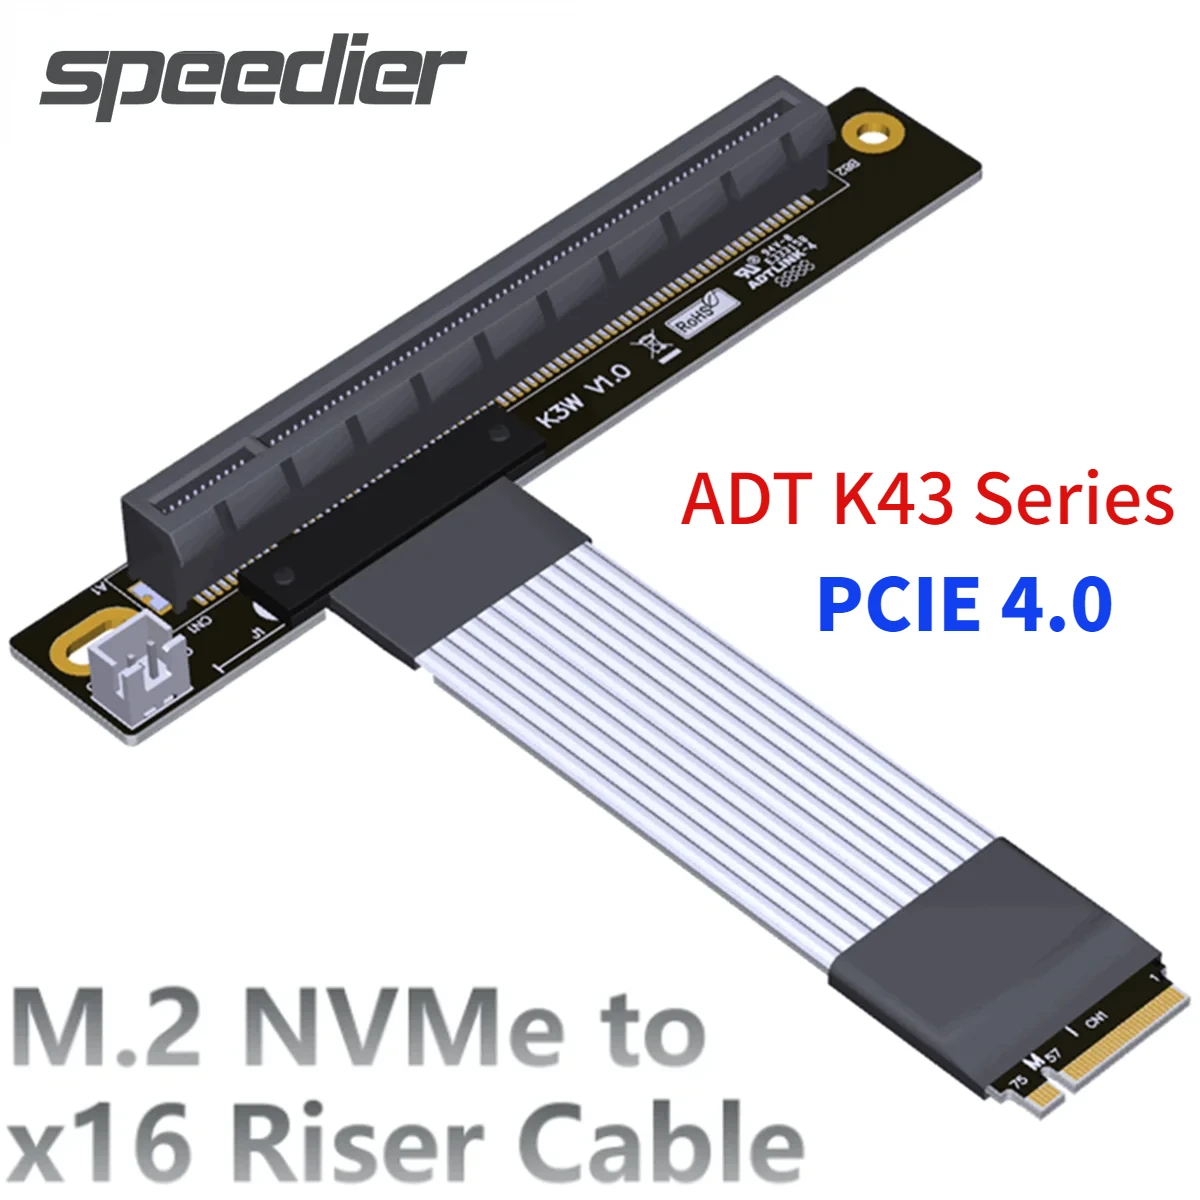 

ADT New Gen4 M.2 NGFF NVMe Key M Extension Cable to PCIE 4.0 X16 M.2 90 Degree Turn Angled 16x Riser Adapter M2 for STX Graphics